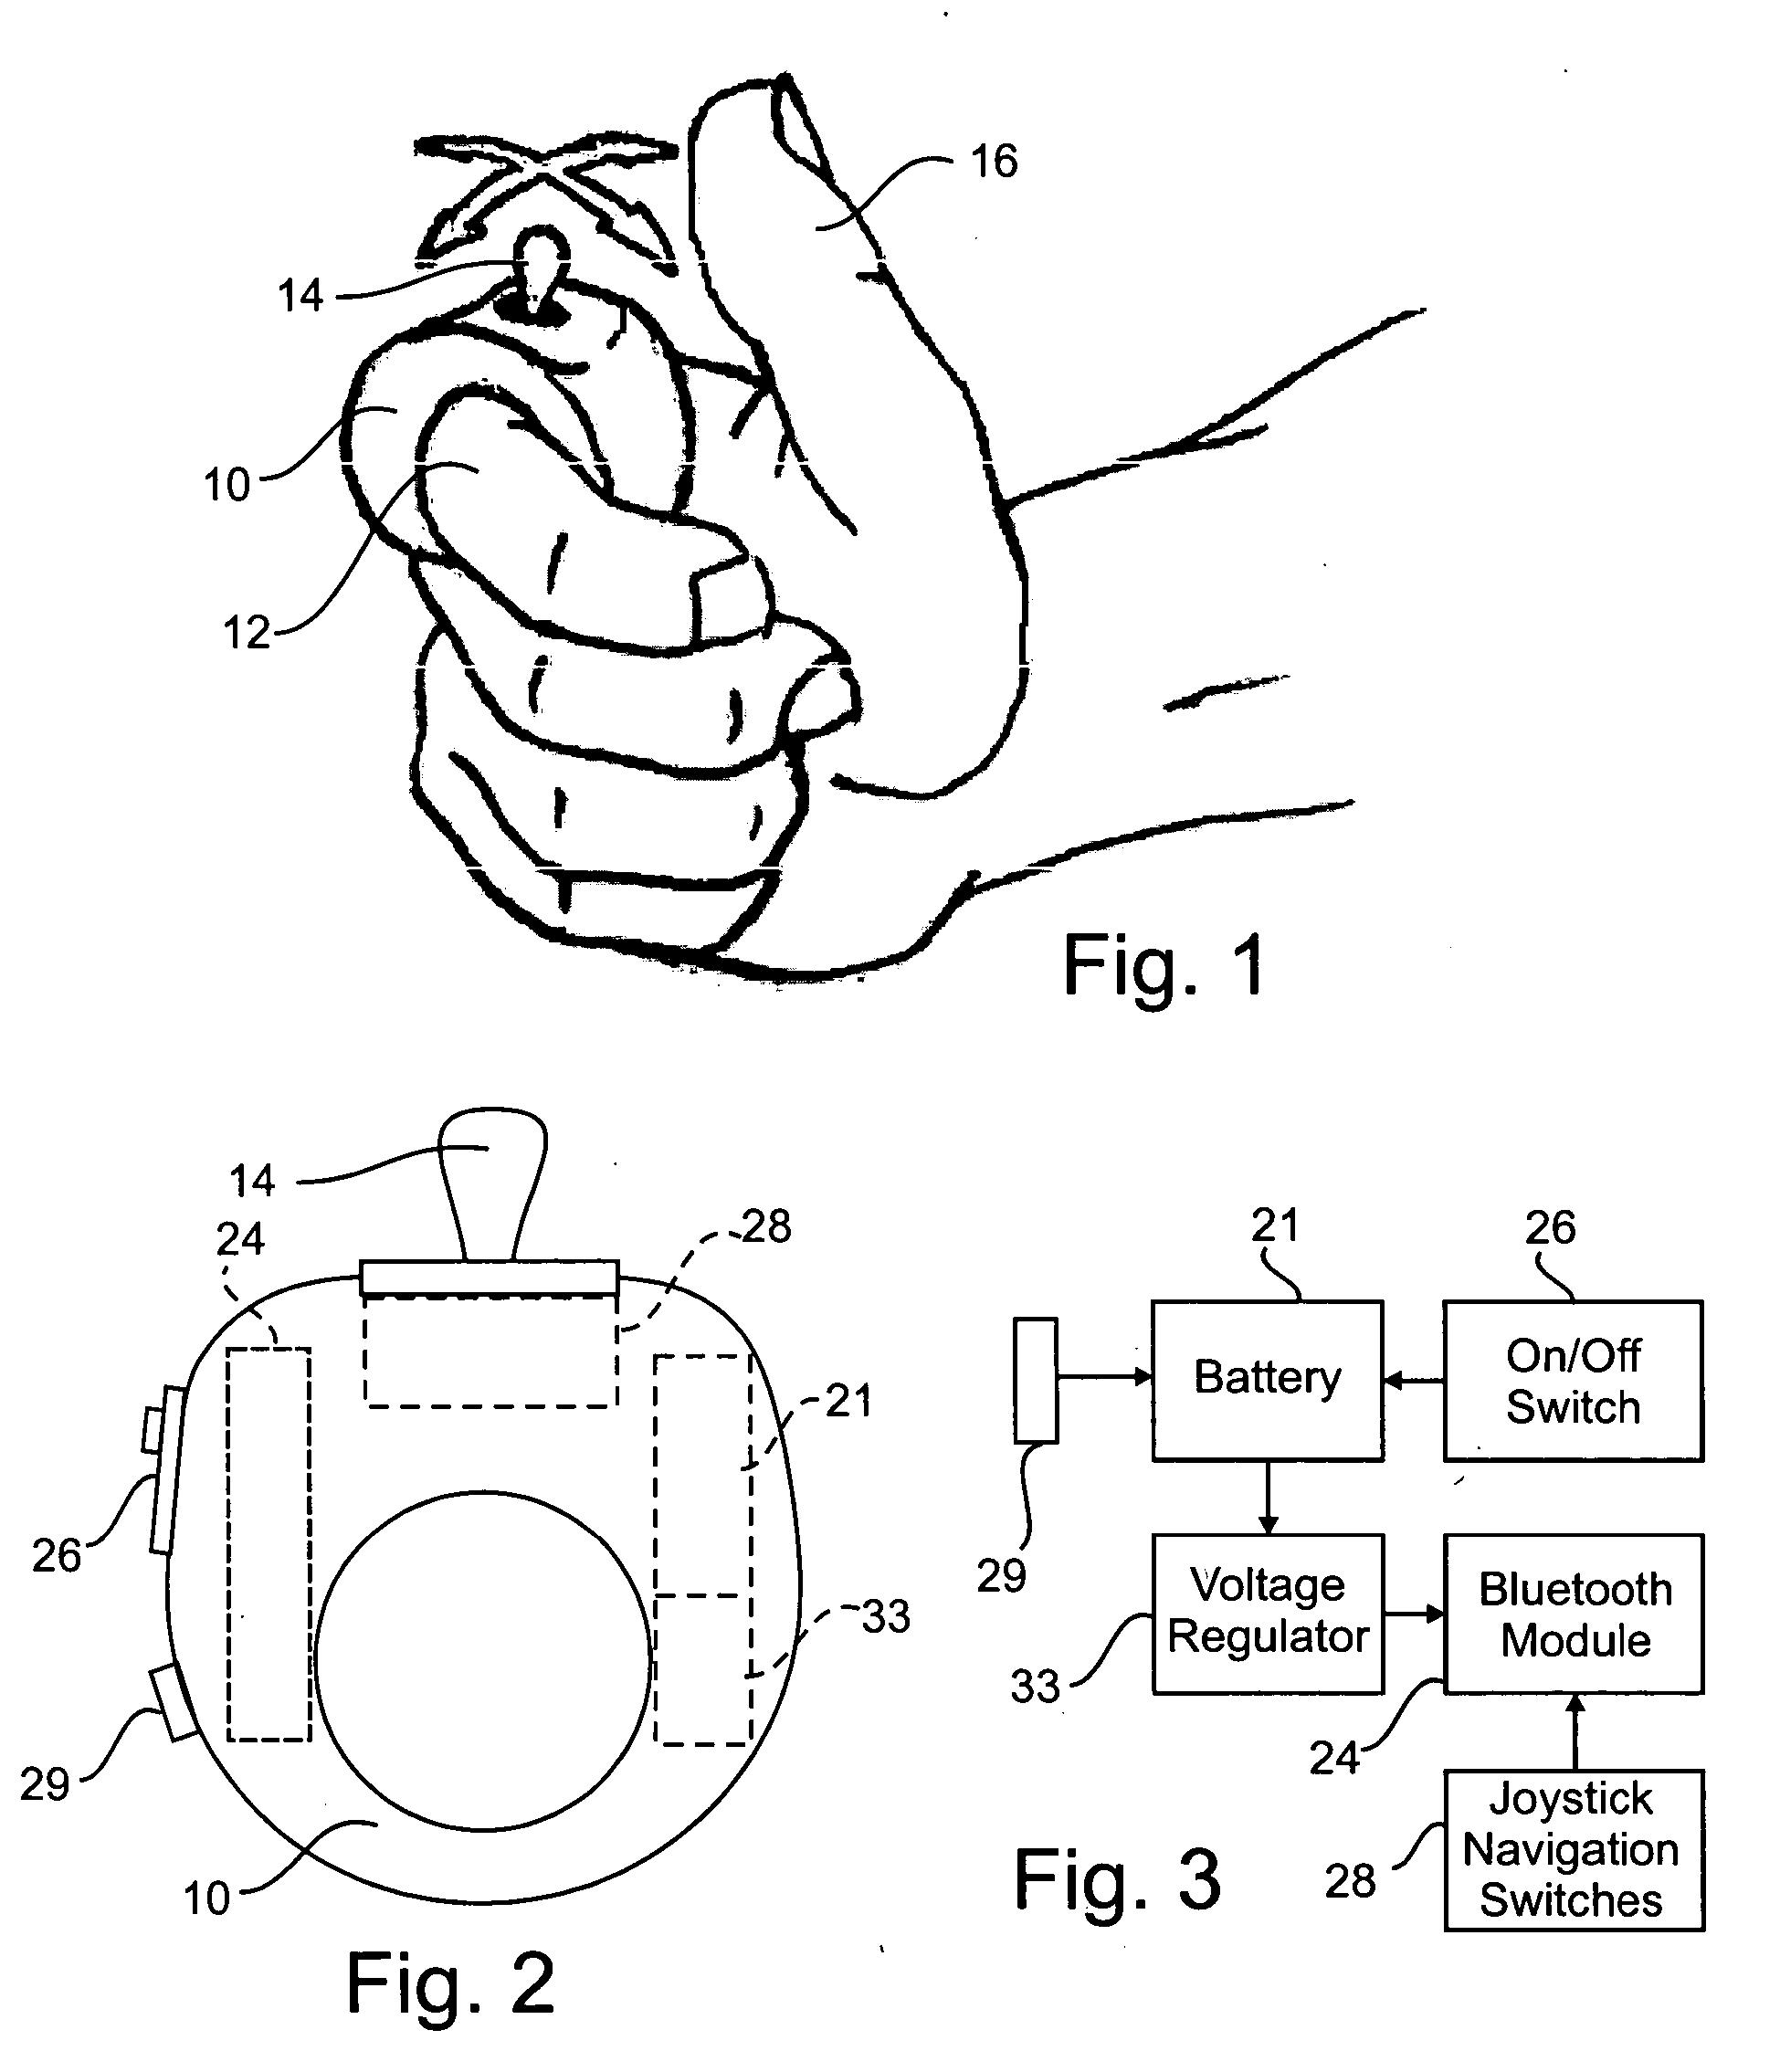 Remote controller ring for user interaction